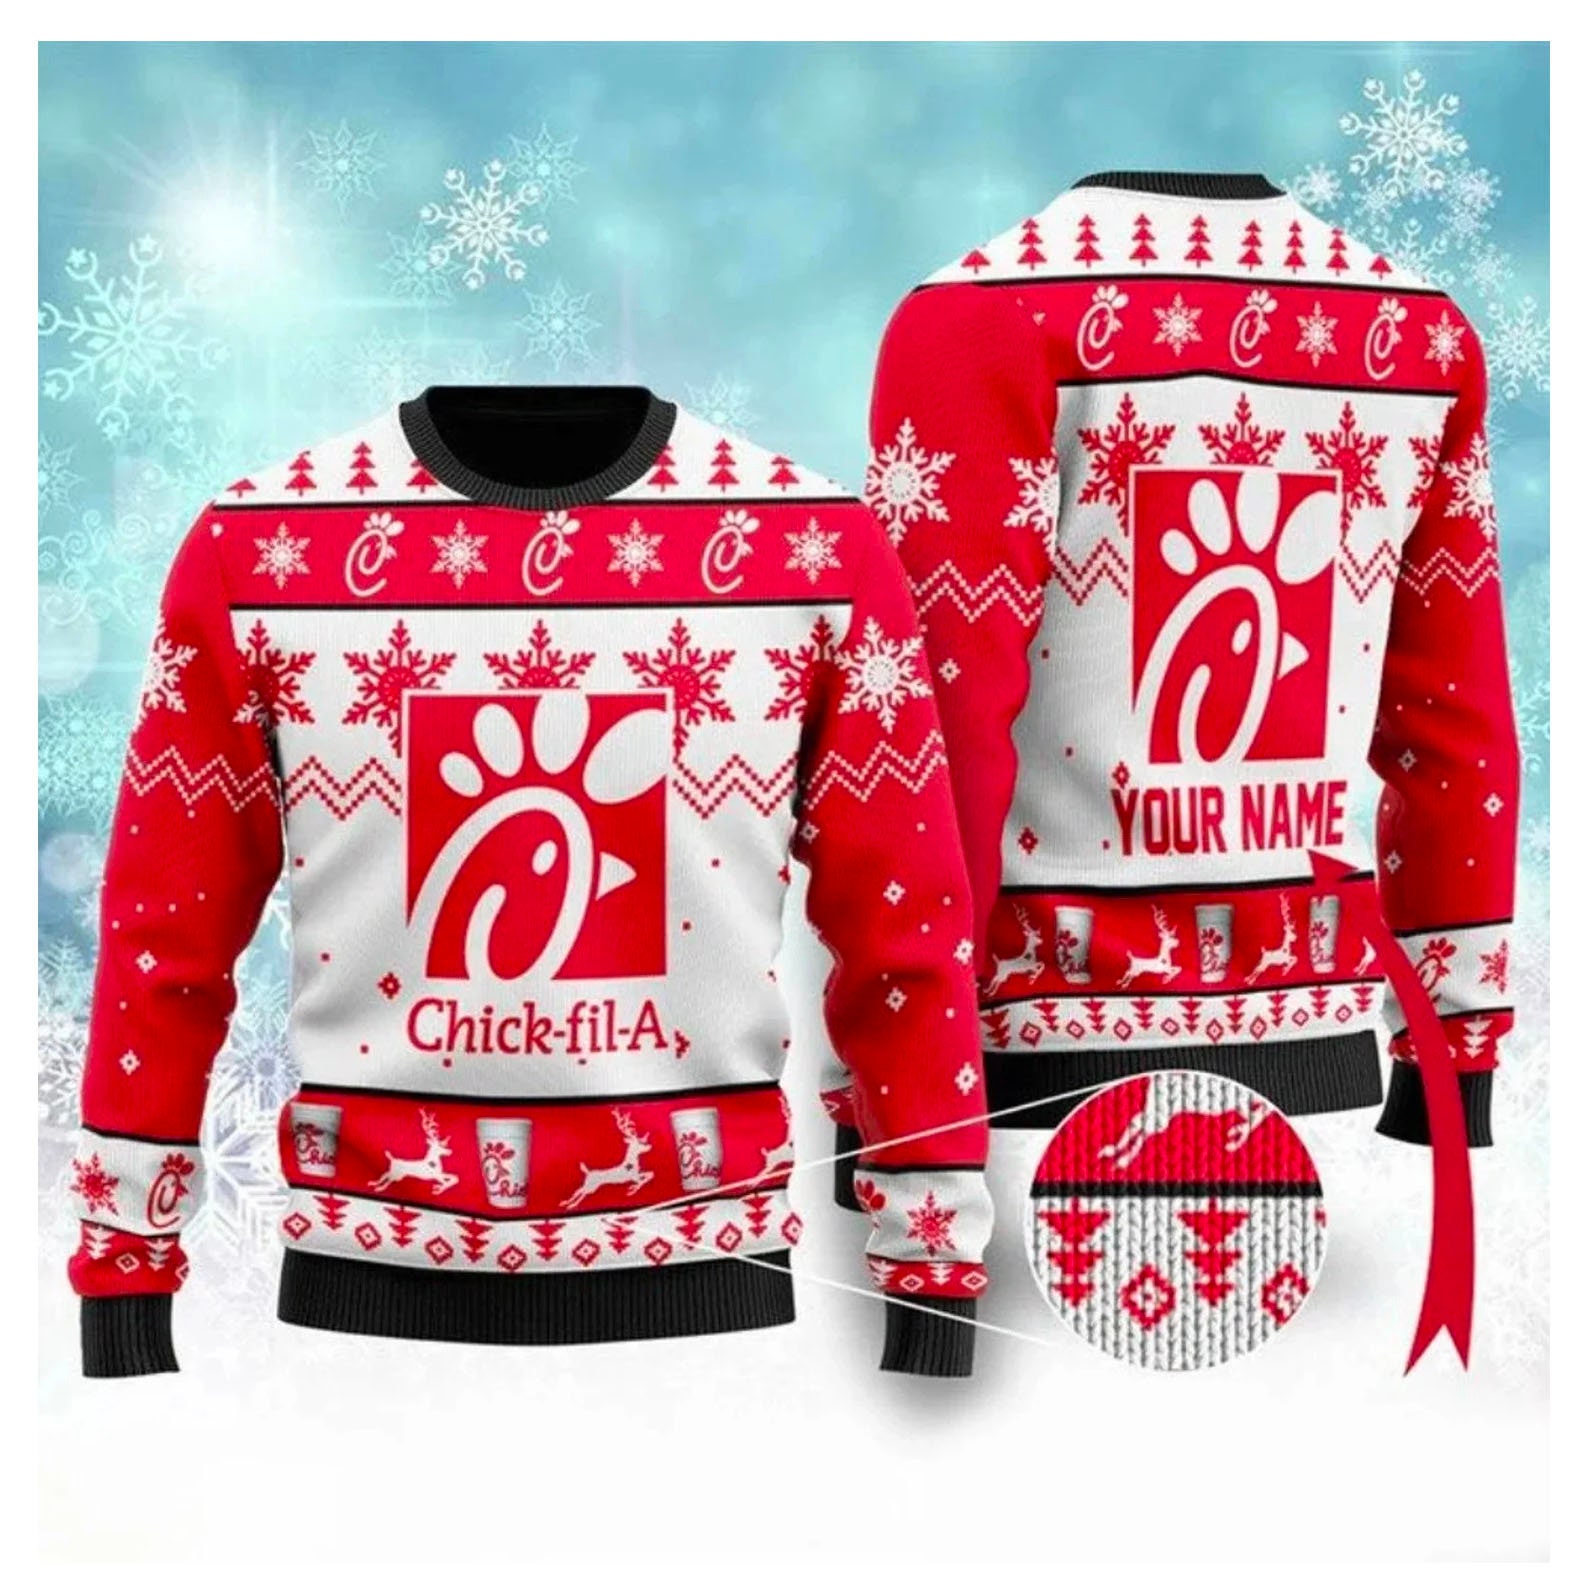 Chick Fil A Ugly Knitted Christmas Sweatshirt, Chick fil A Xmas Sweater